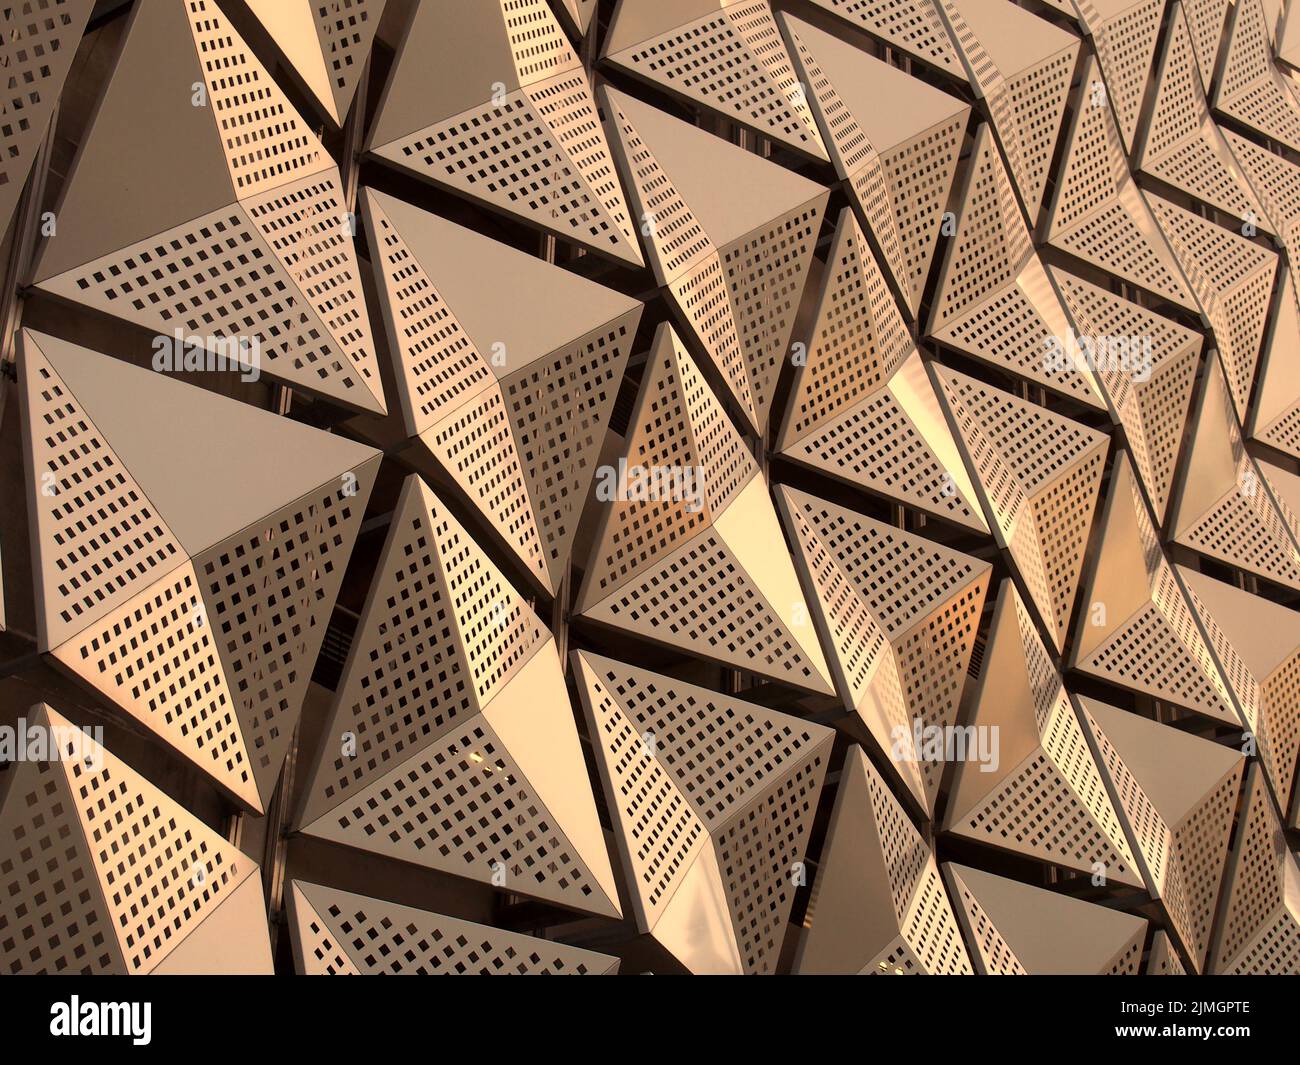 Metallic geometric cladding or panels in copper and gold colors Stock Photo